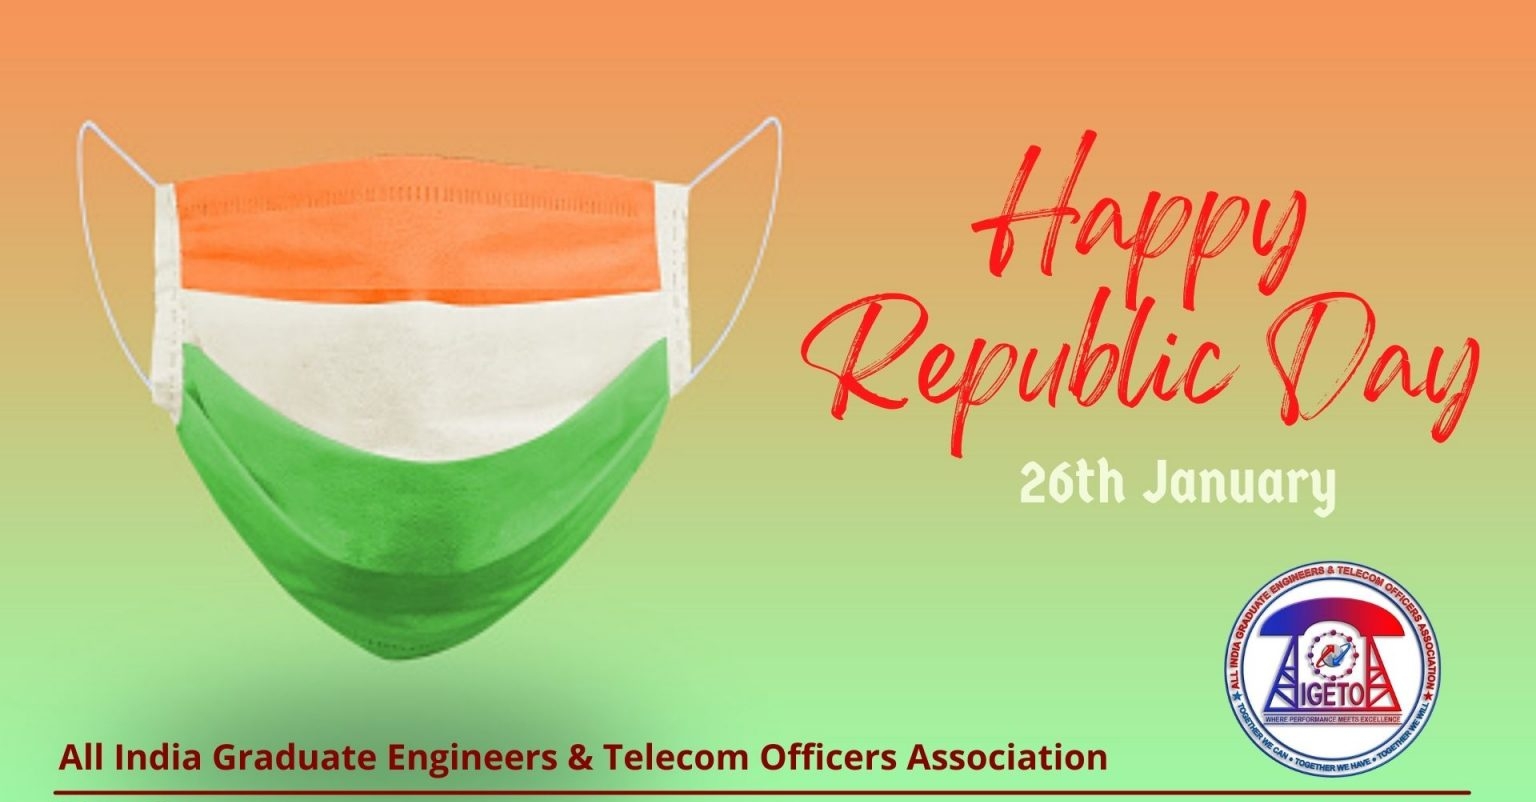 73rd Republic day wishes